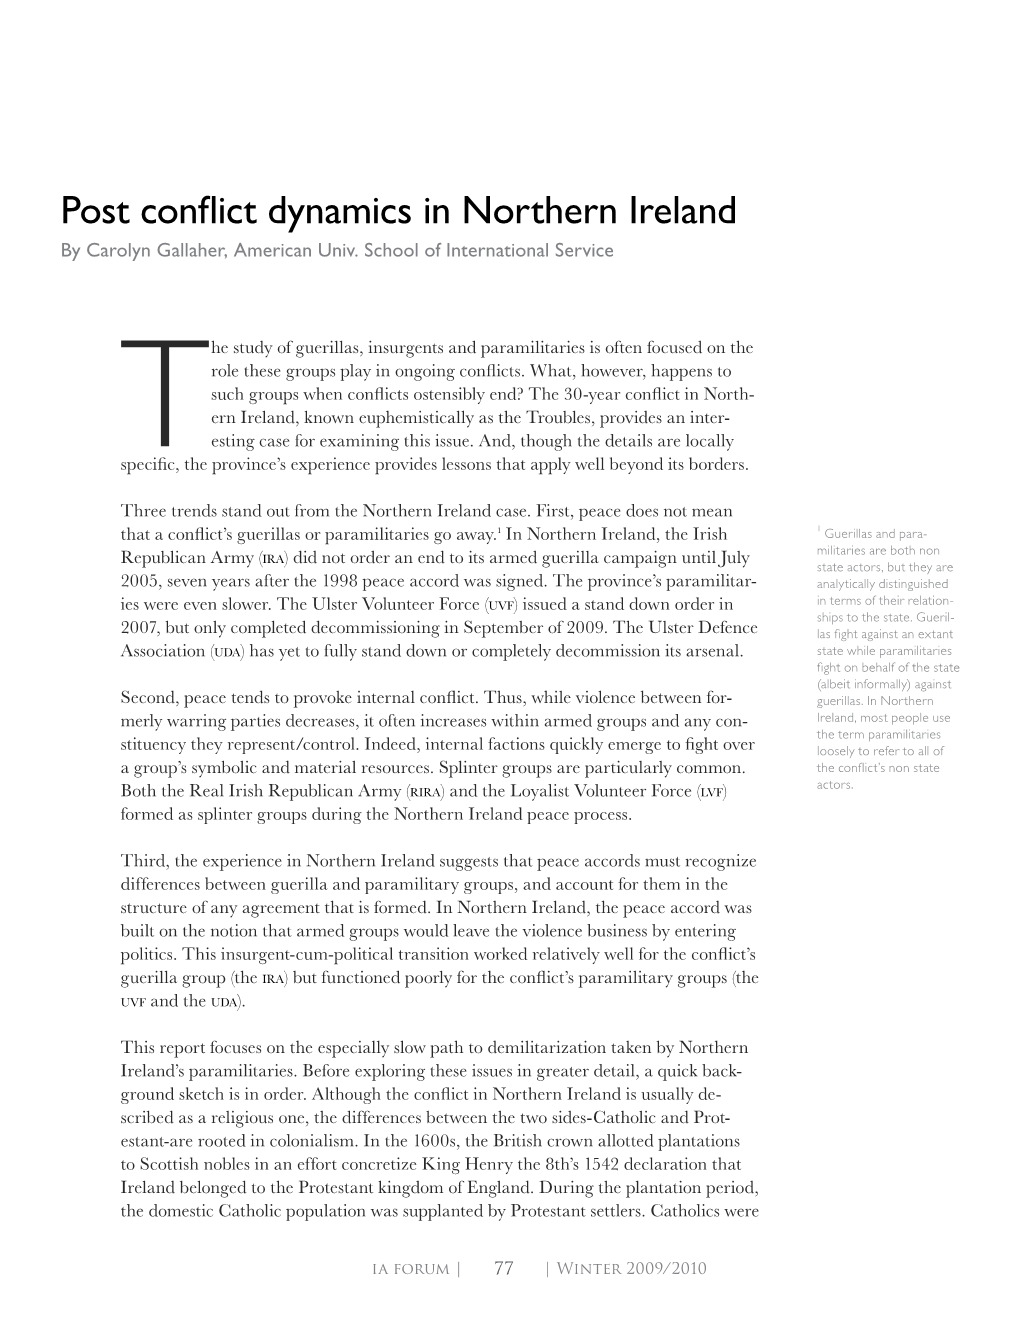 Post Conflict Dynamics in Northern Ireland by Carolyn Gallaher, American Univ